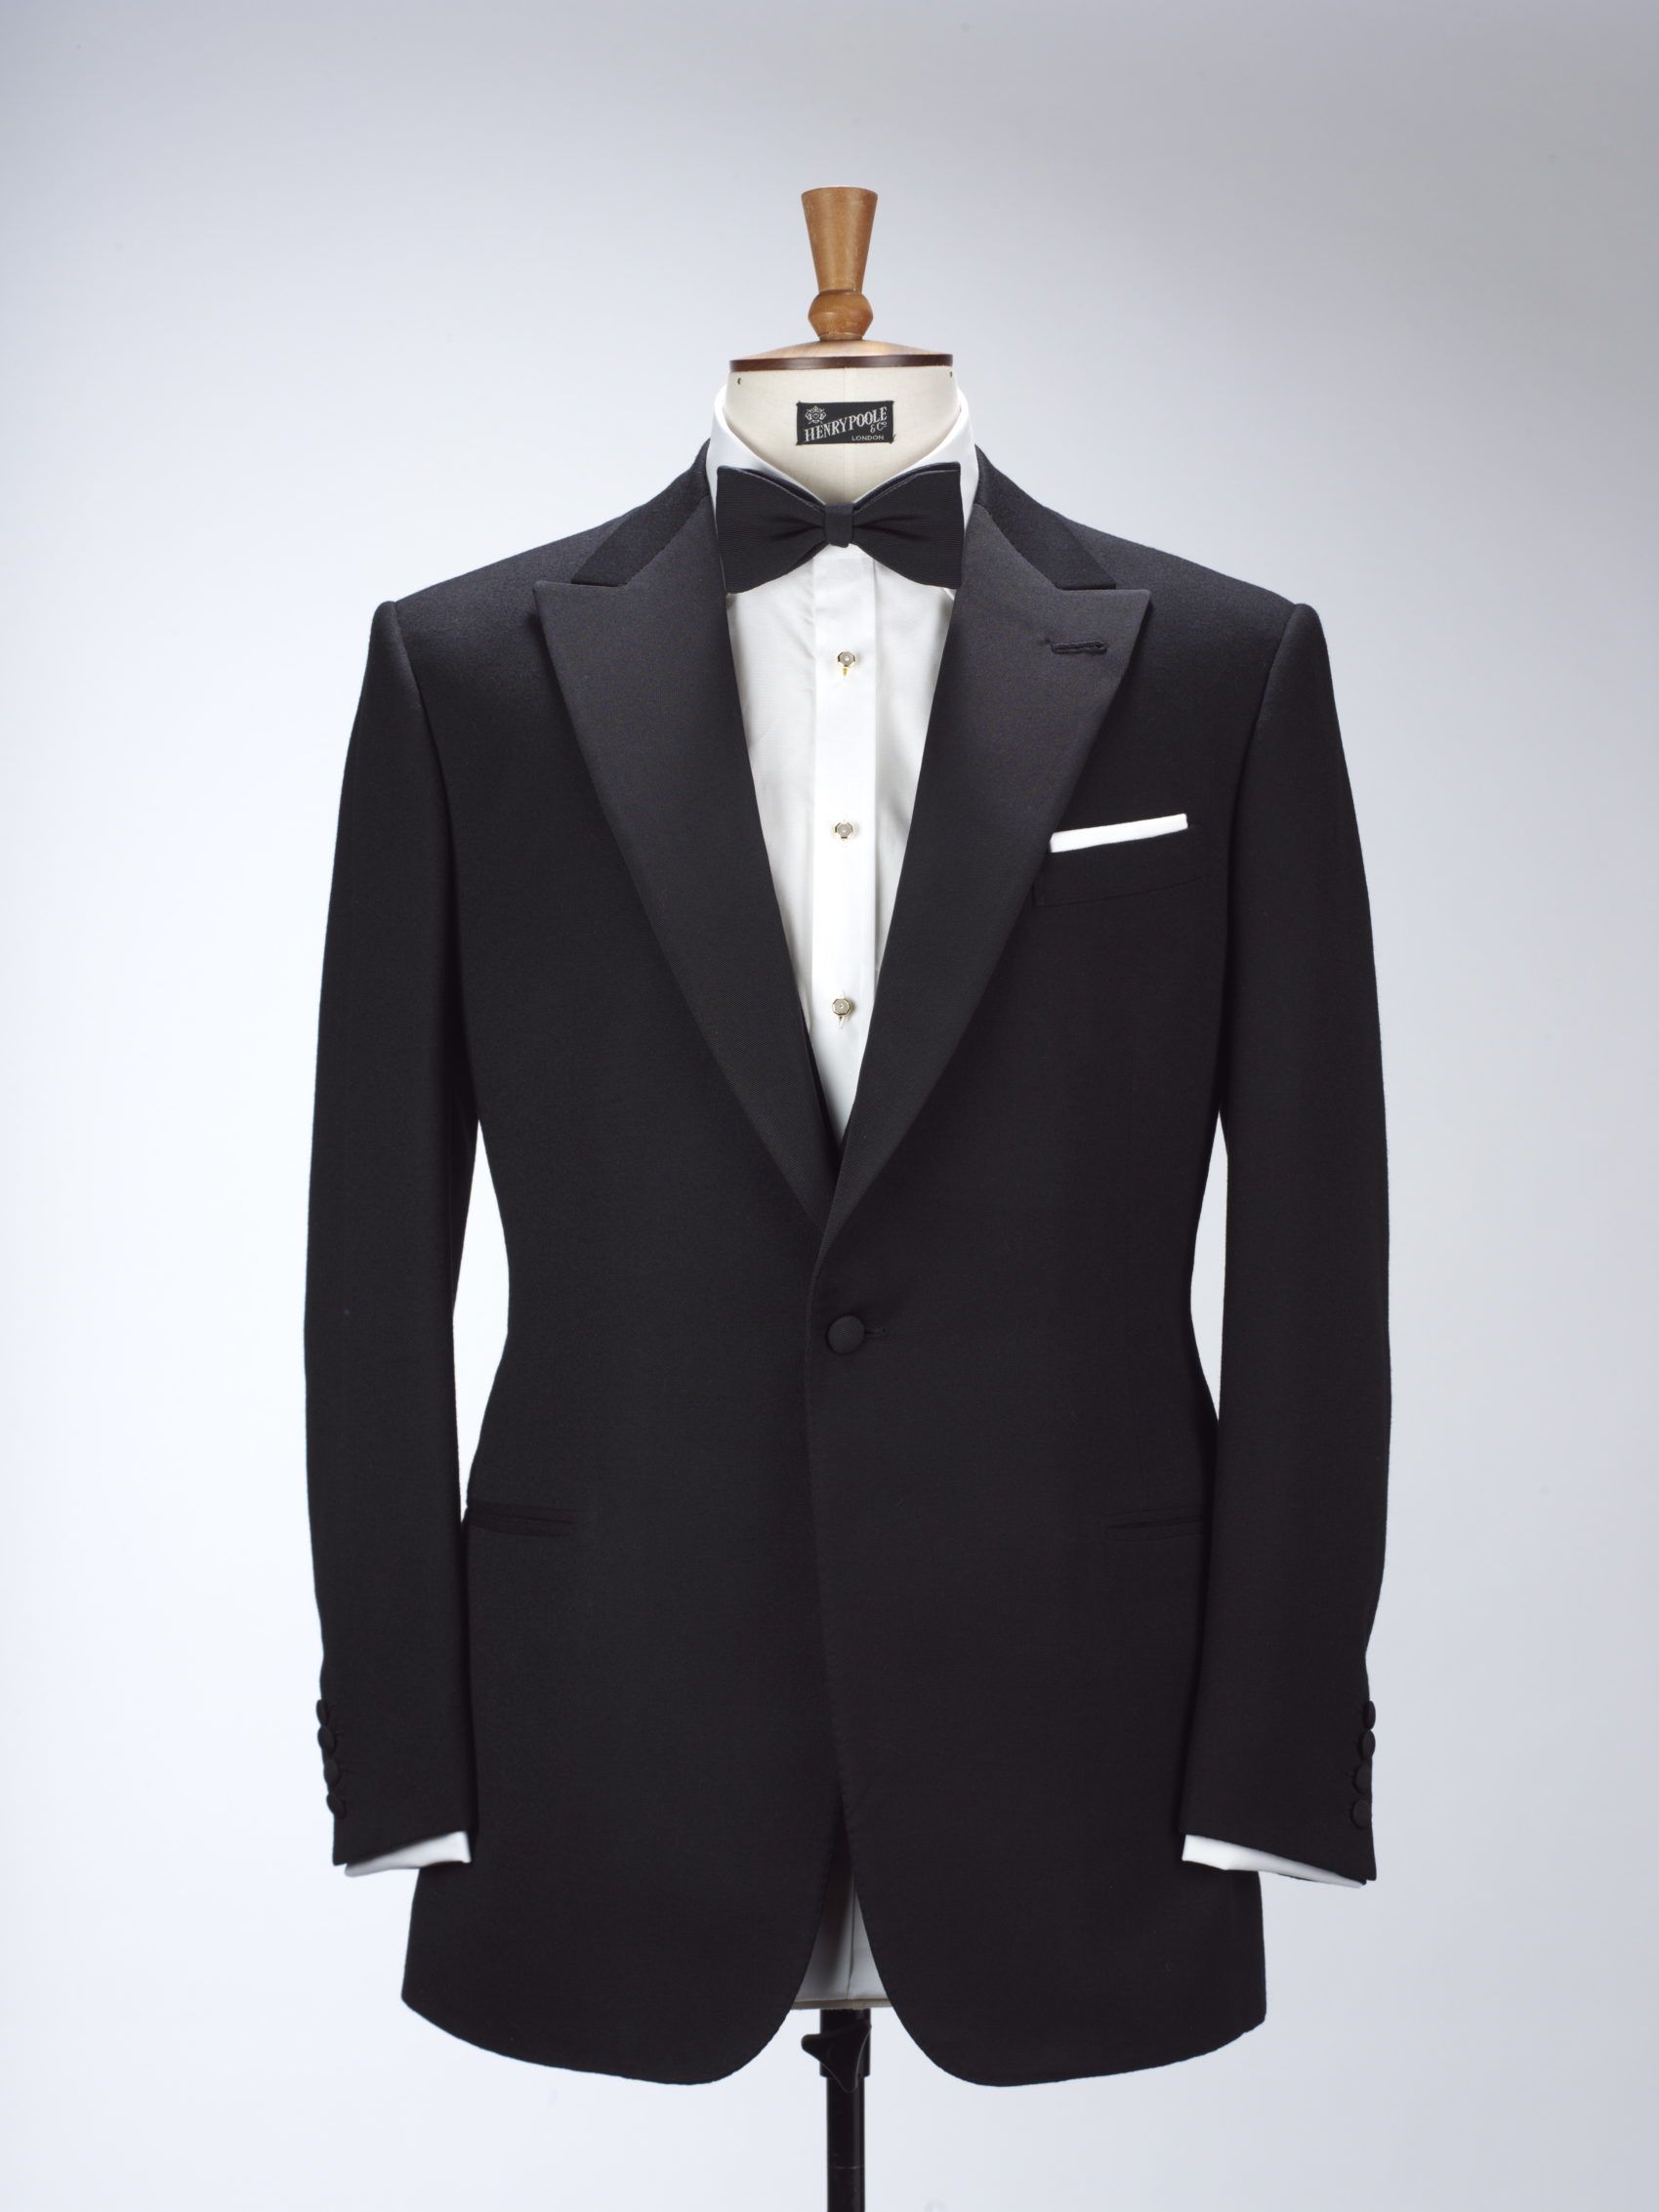 The Dinner Suit Henry Poole Savile Row The First Tuxedo